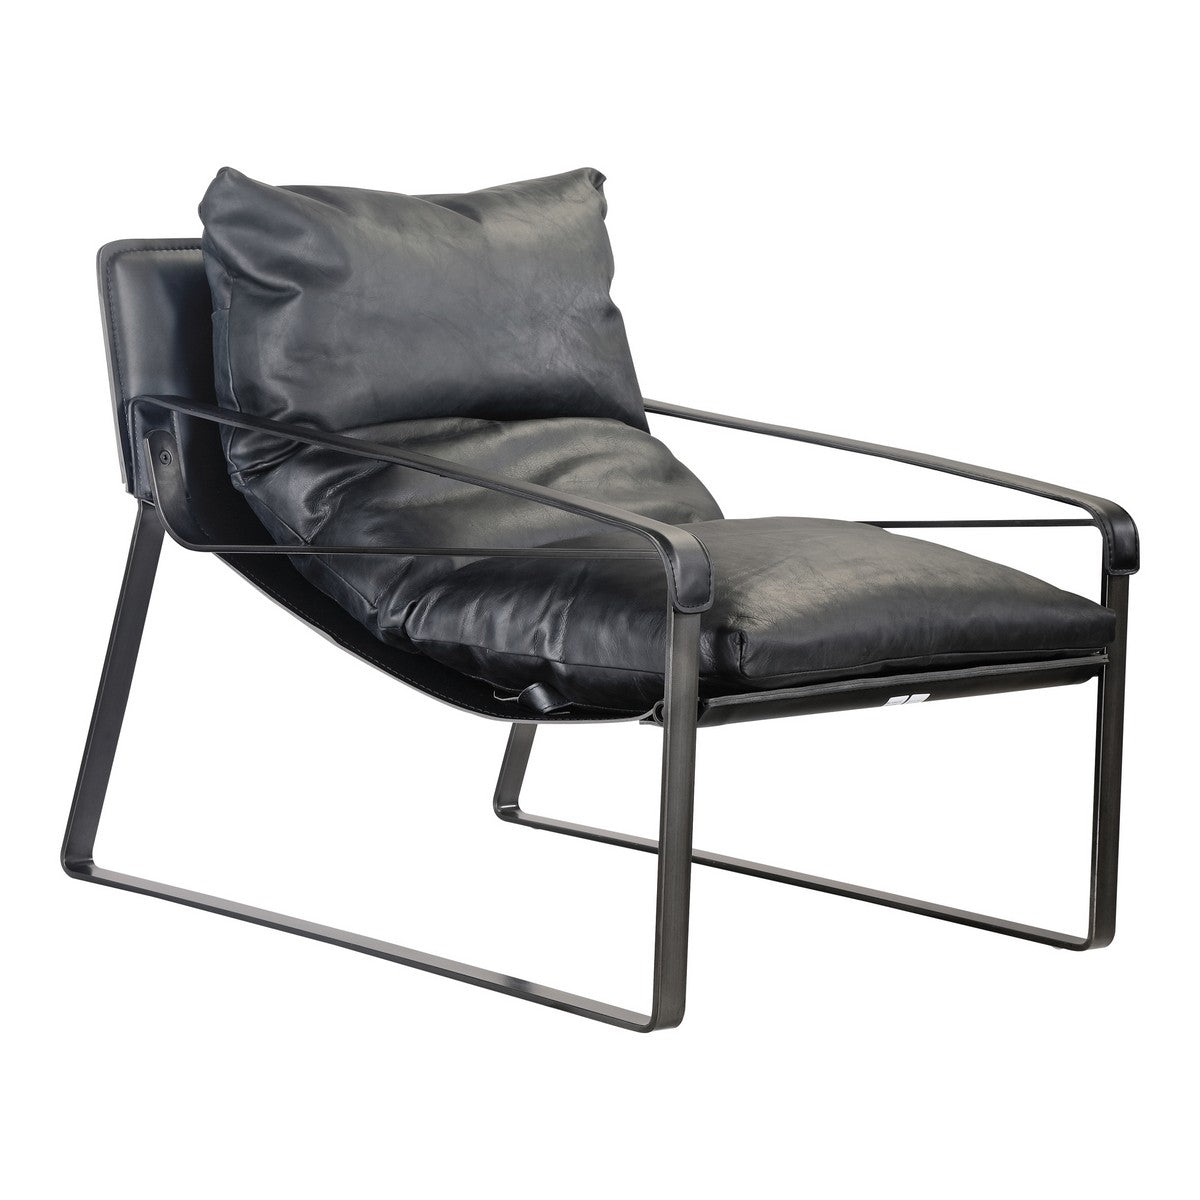 Moe's Home Collection Connor Club Chair Black - PK-1044-02